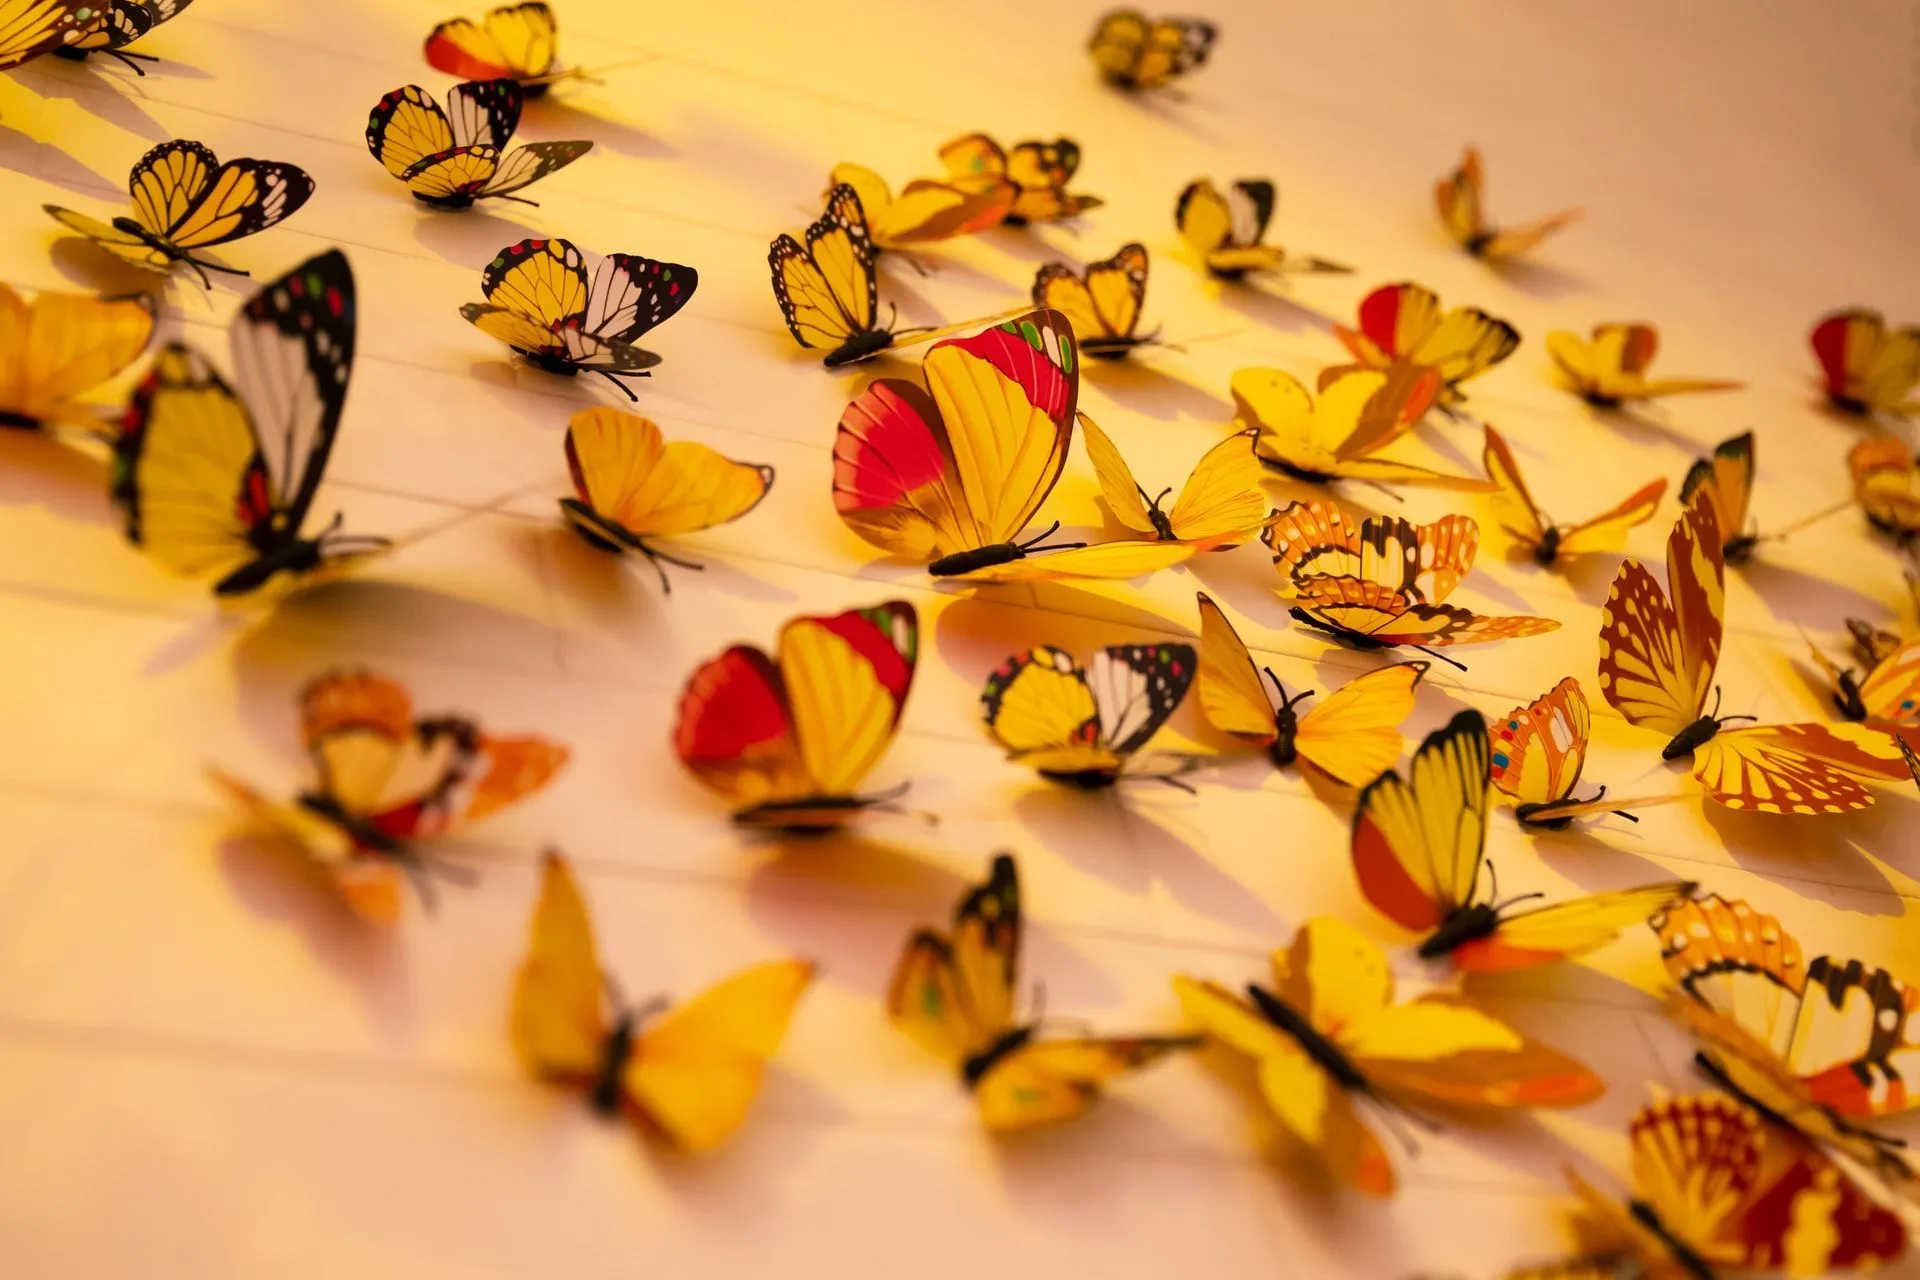 Do all butterflies have antennae? Find out here at Kidadl.